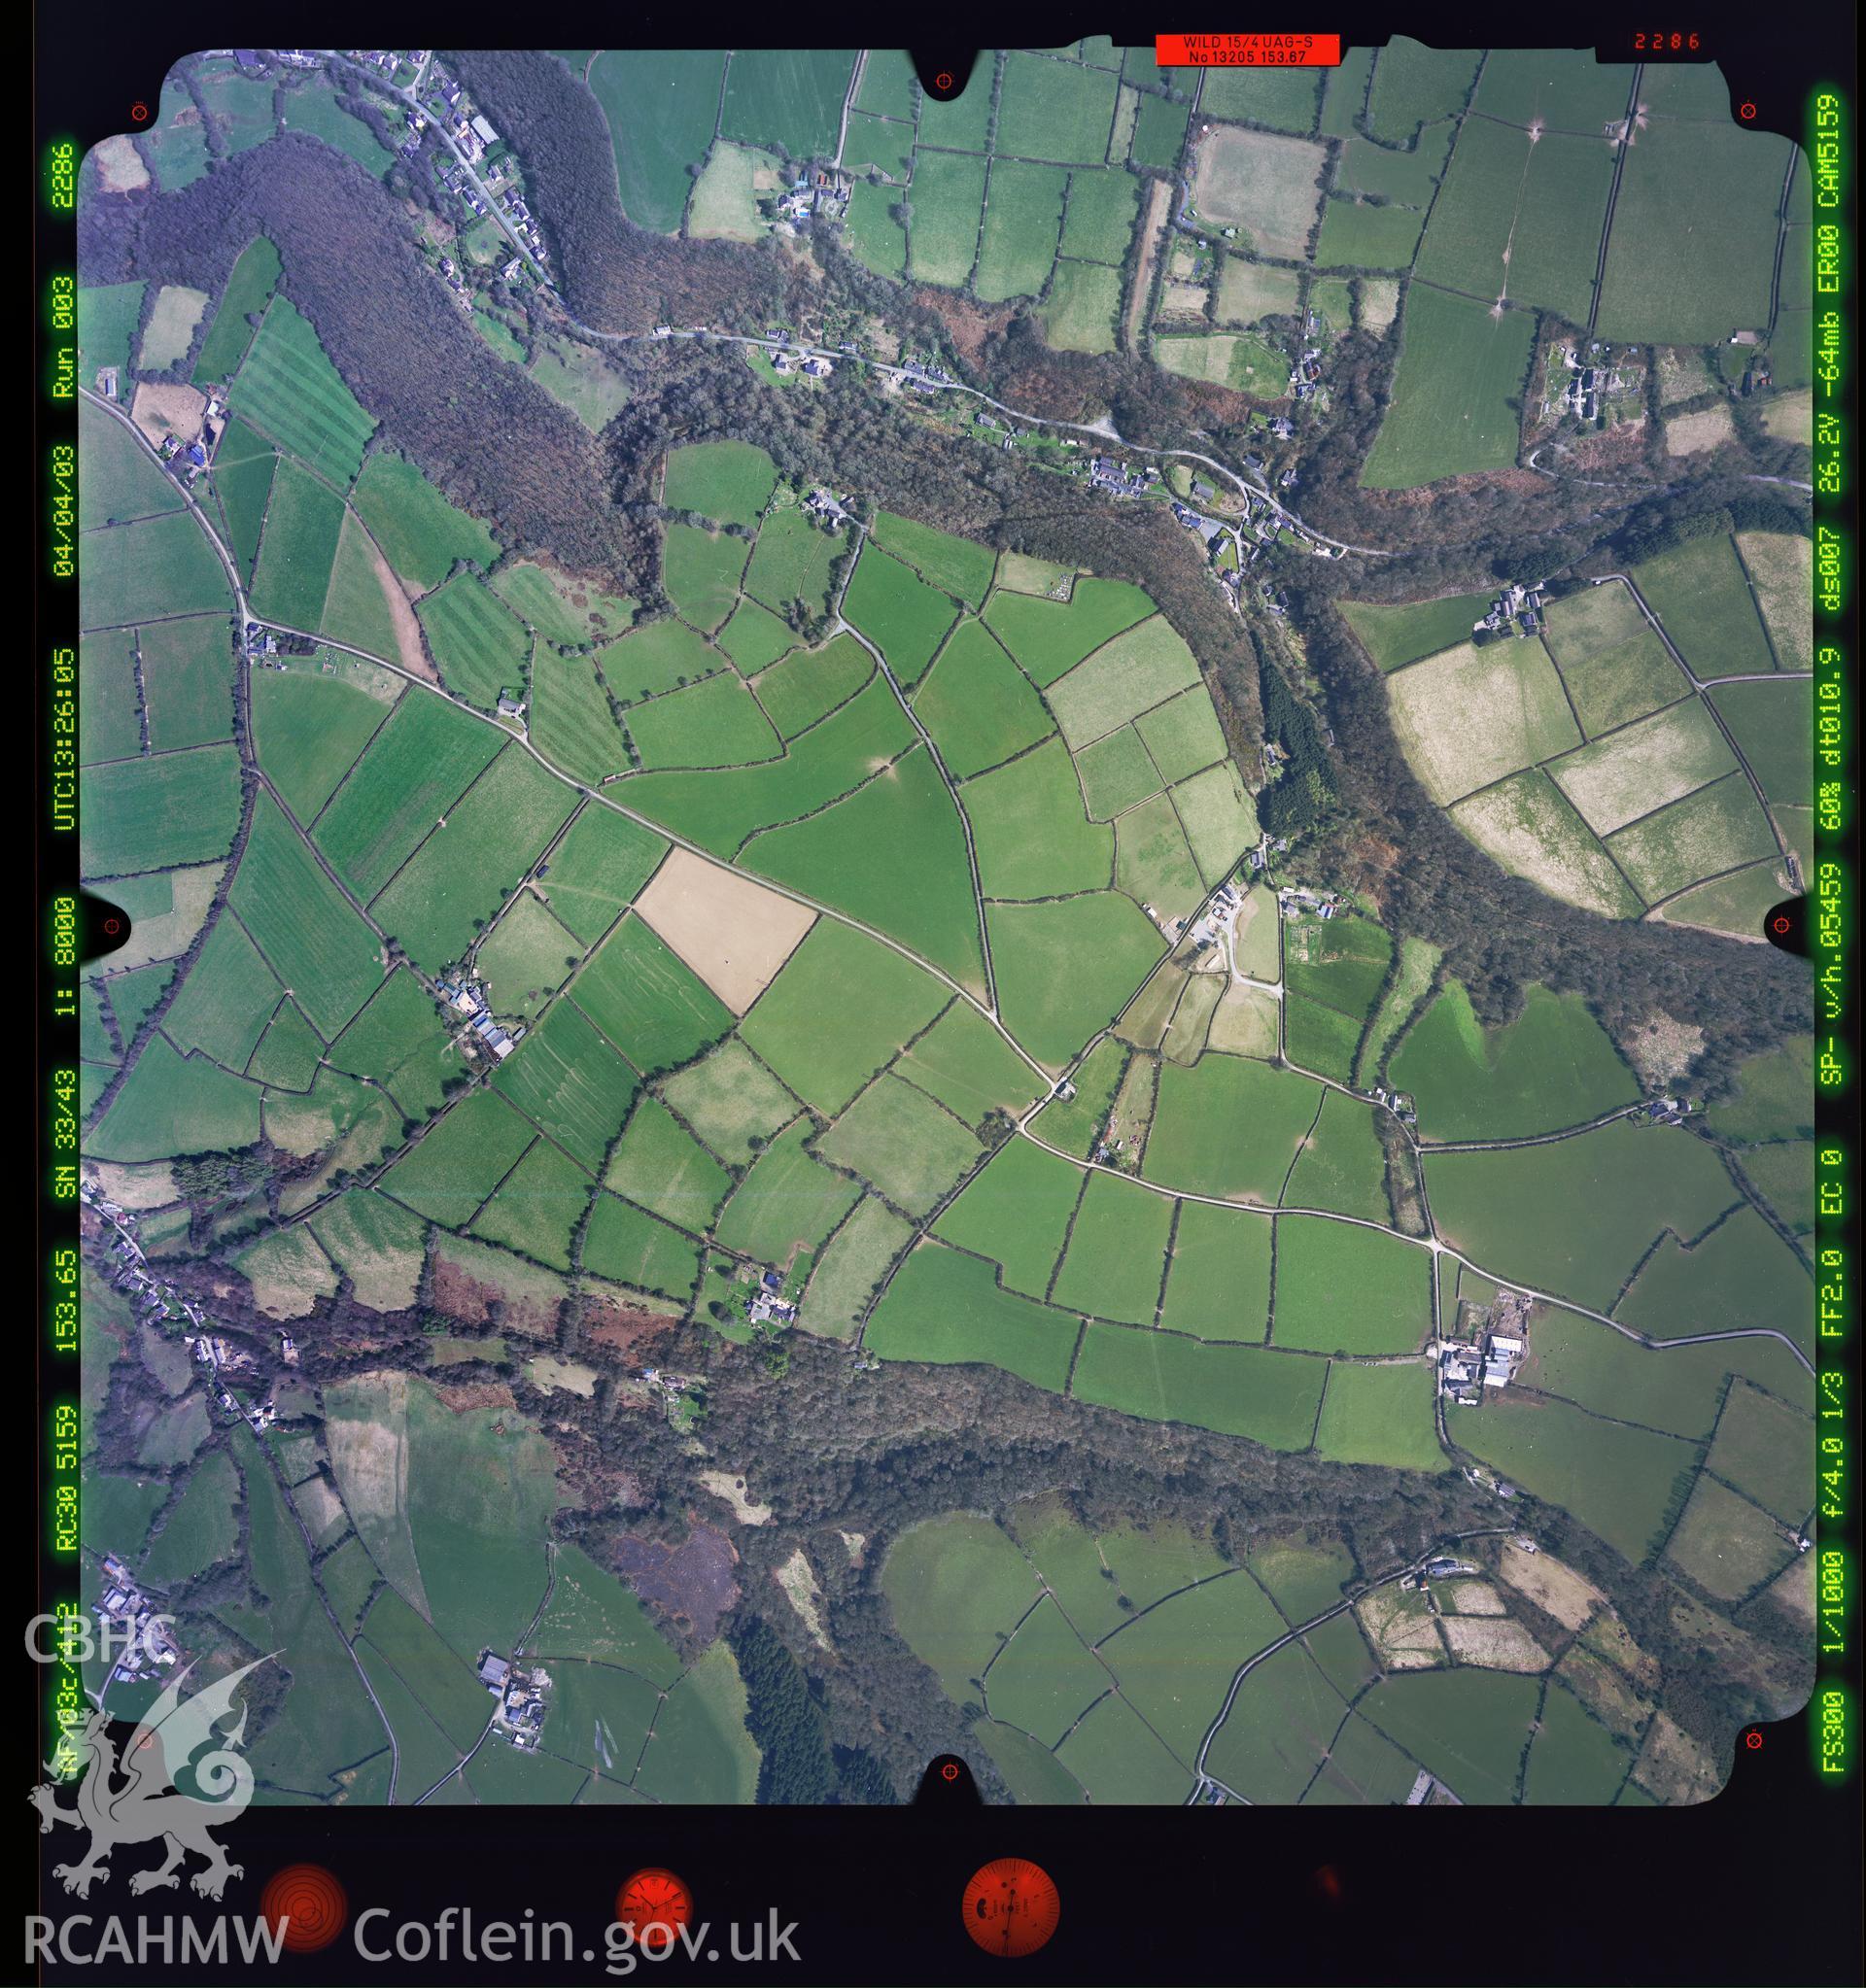 Digitized copy of a colour aerial photograph showing an area around Cwmpencraig, Carmarthen, taken by Ordnance Survey, 2003.